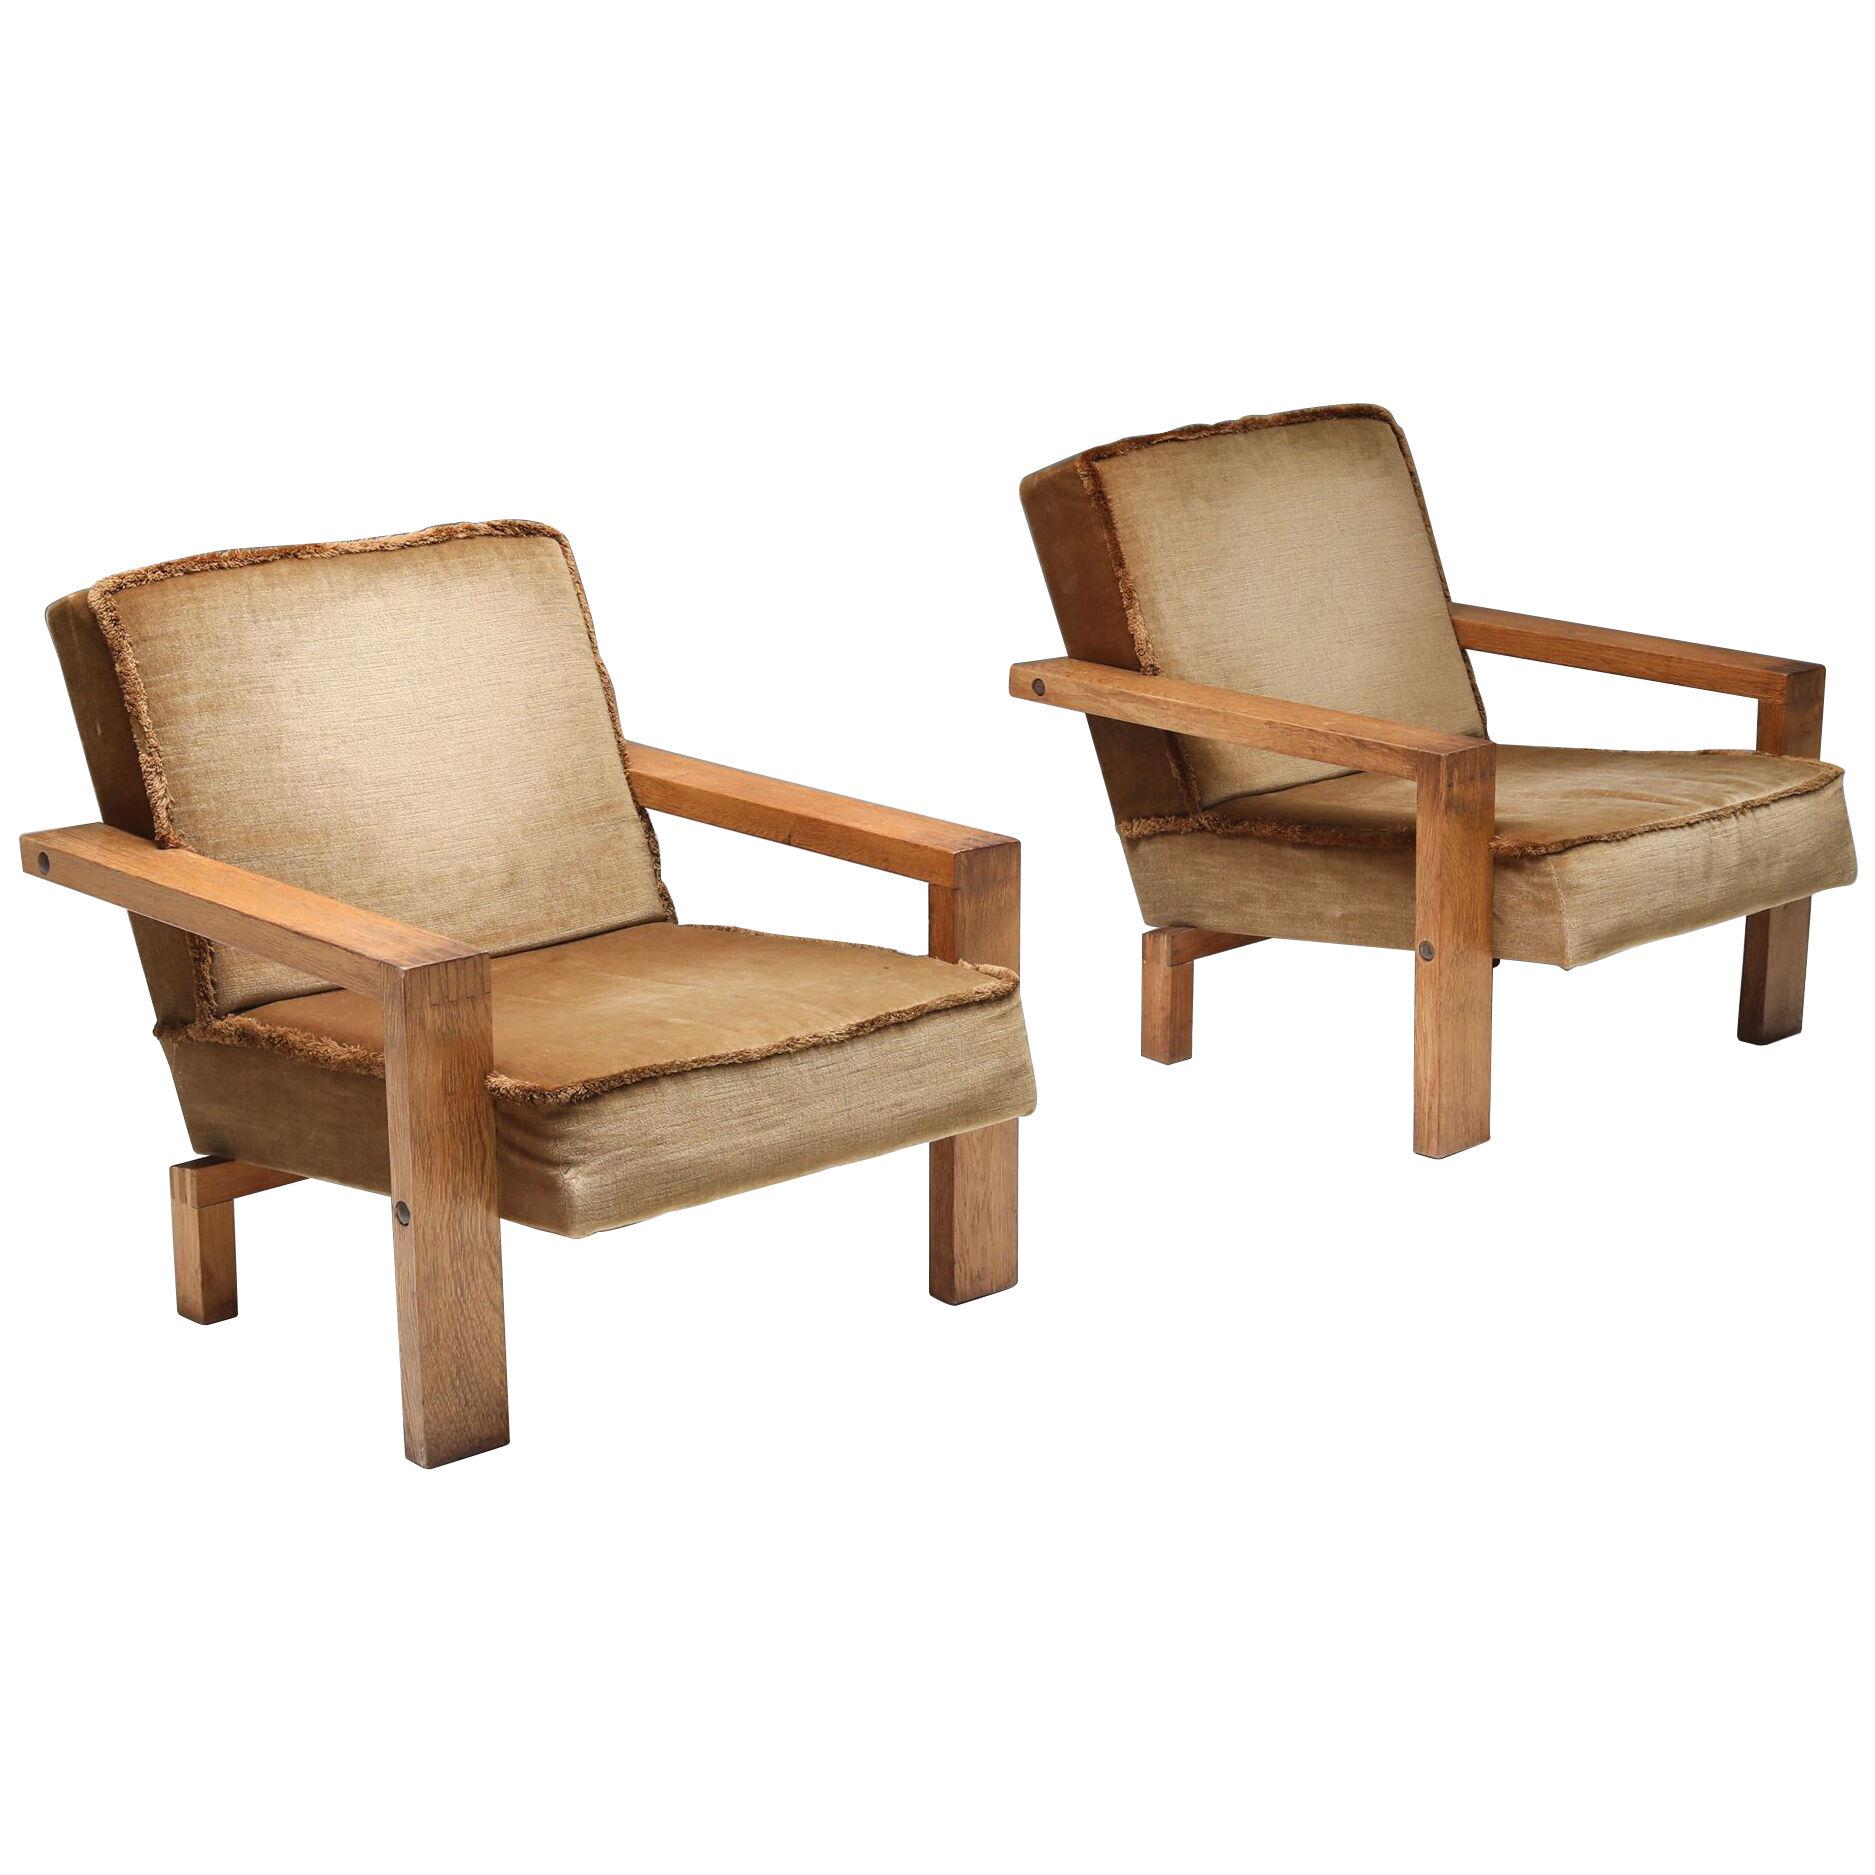  Set of Lounge Chairs by Wim Den Boon - 1960's